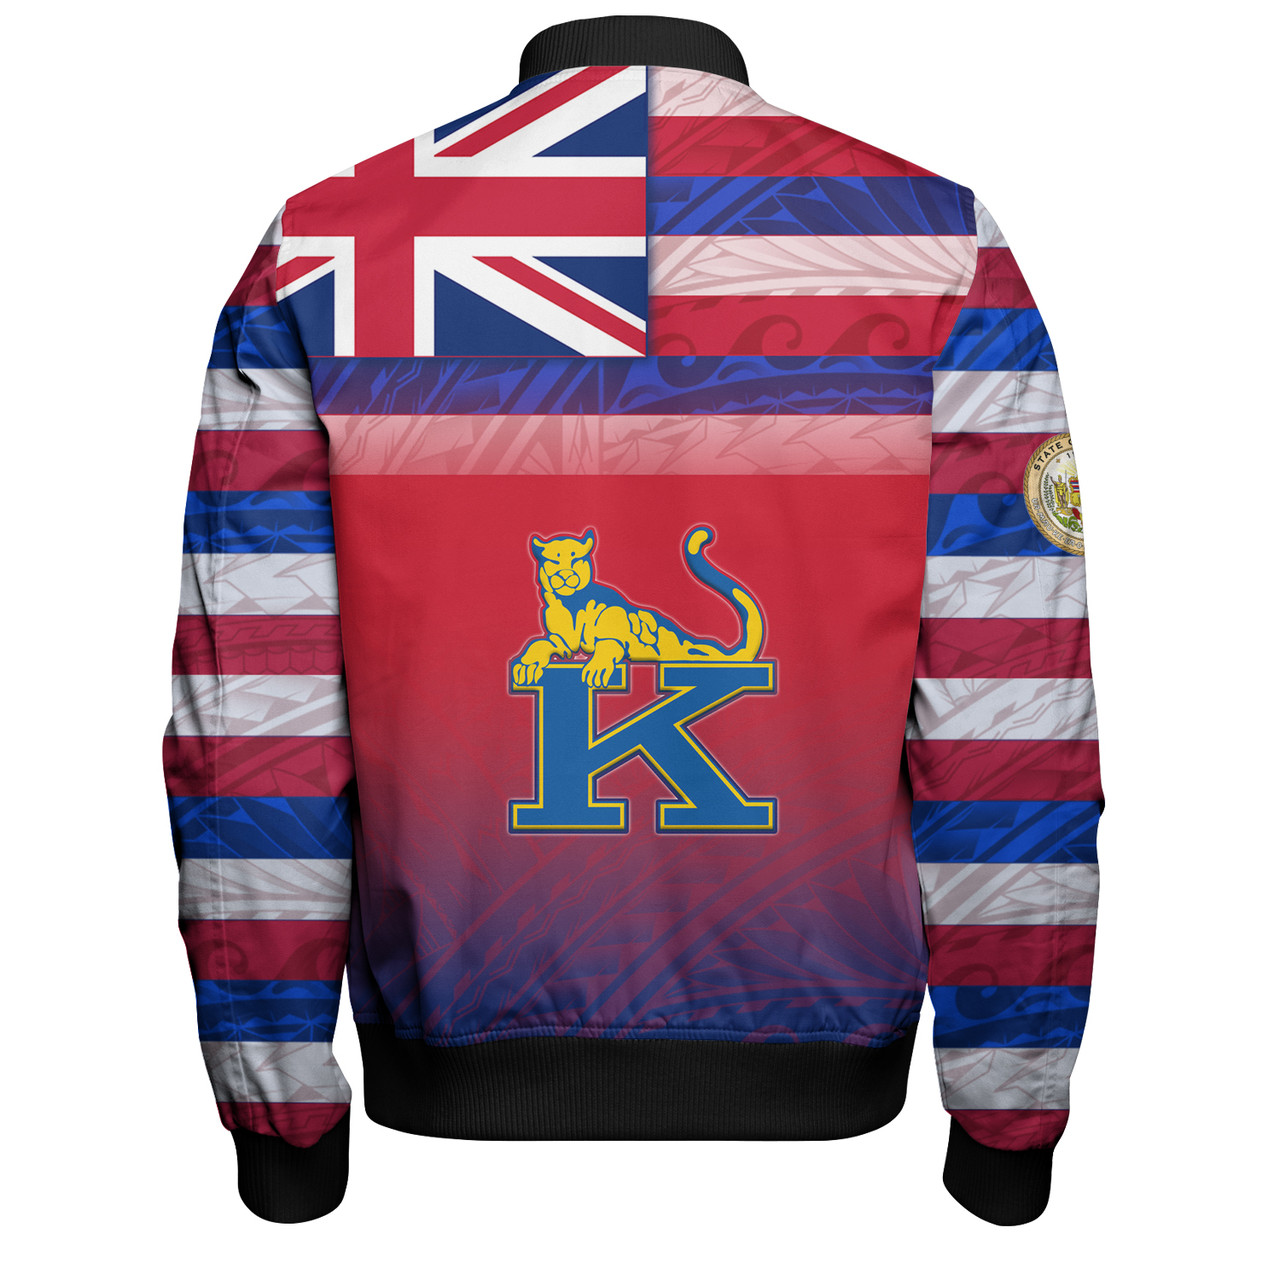 Hawaii Henry J. Kaiser High School Bomber Jacket Flag Color With Traditional Patterns